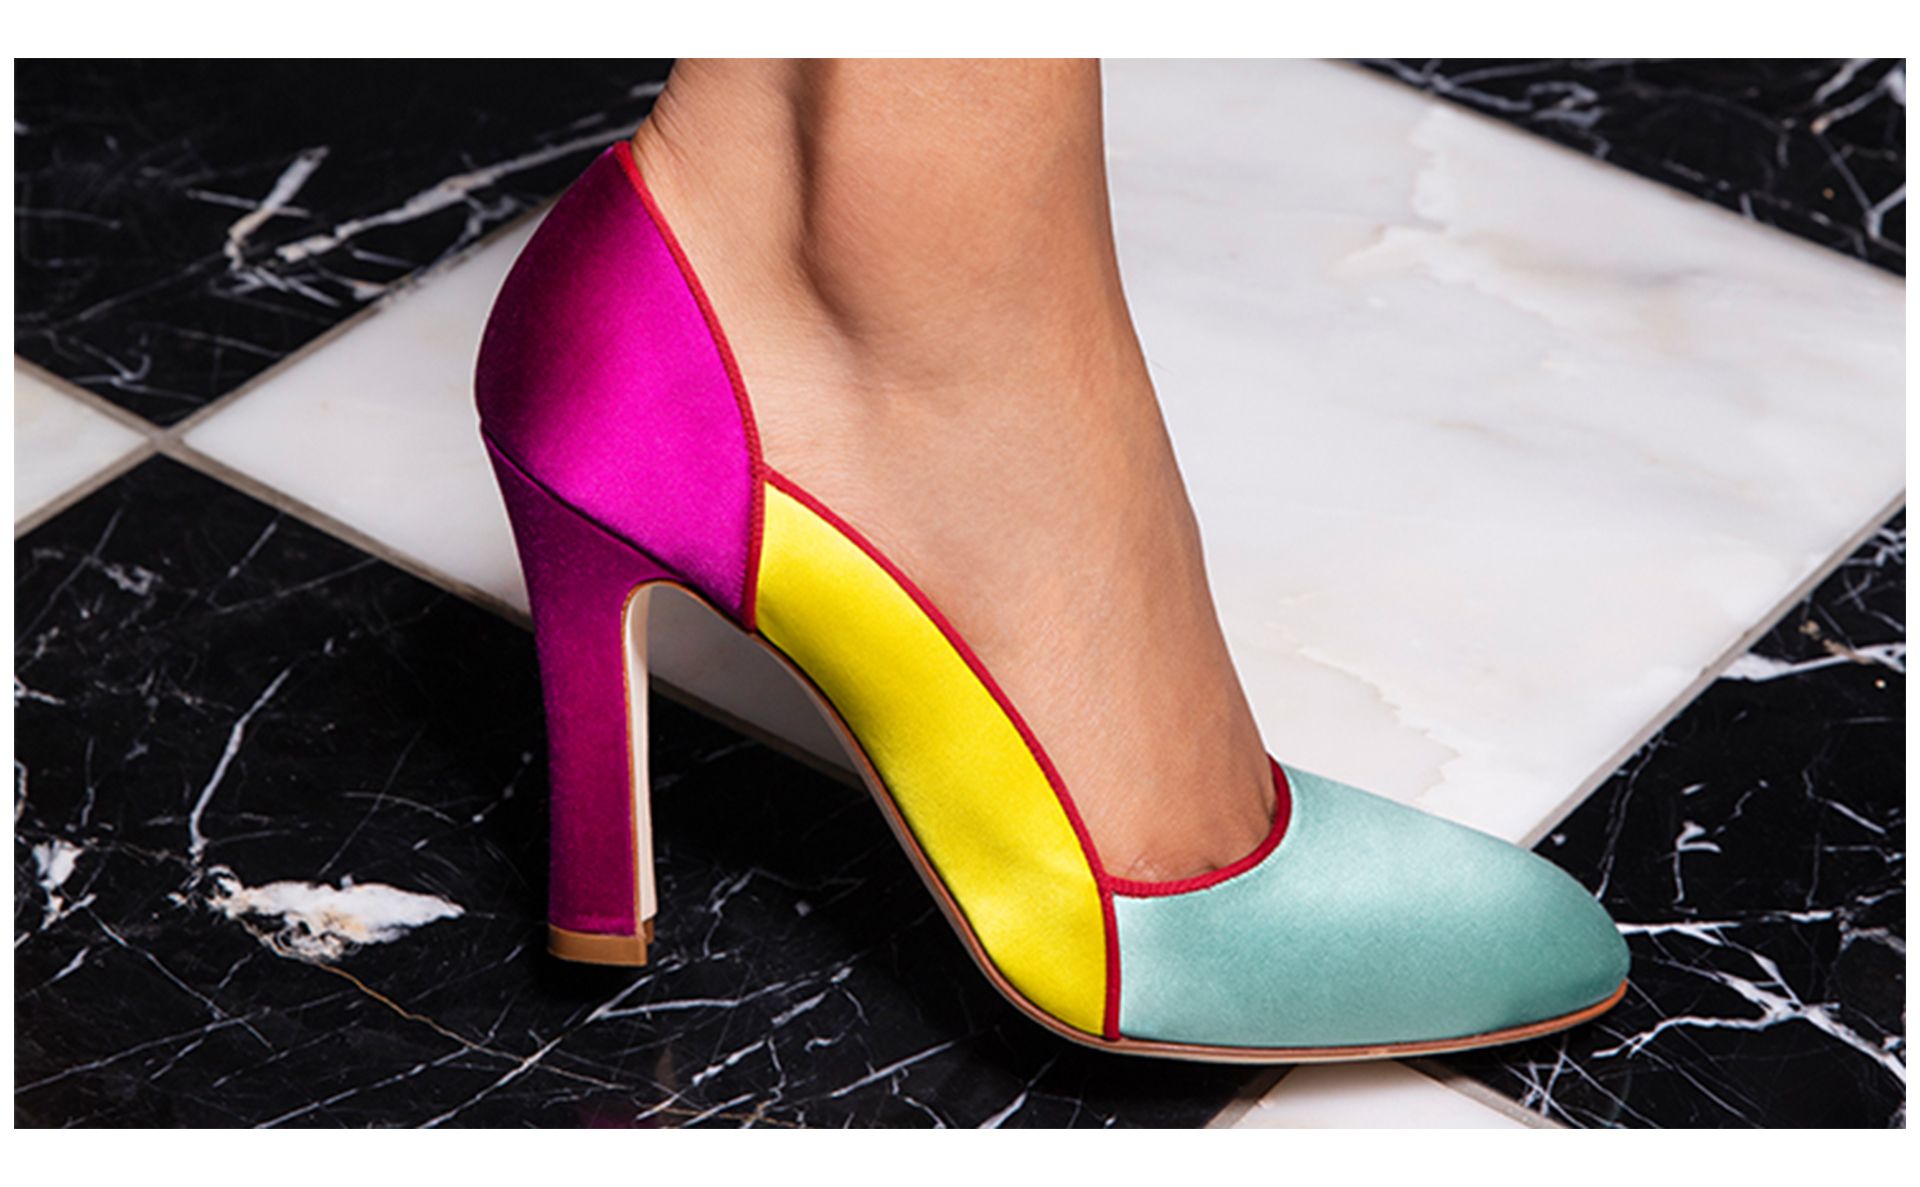 Designer Teal, Yellow and Pink Satin Scalloped Pumps - Image 